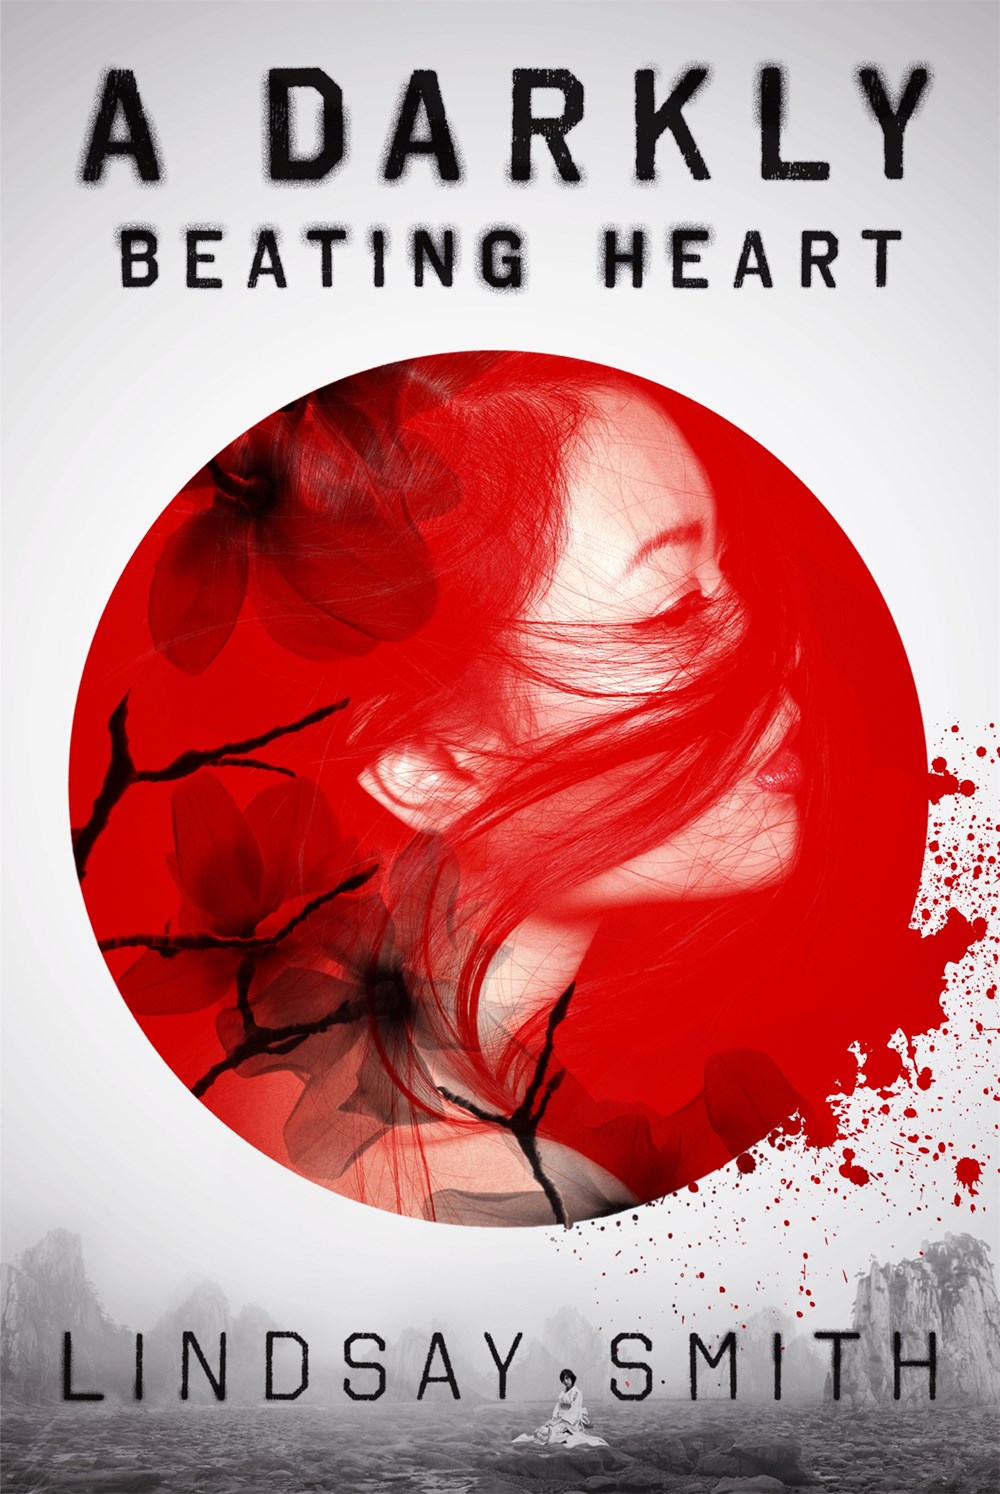 Blog Tour: A Darkly Beating Heart by Lindsay Smith (Review+Giveaway)